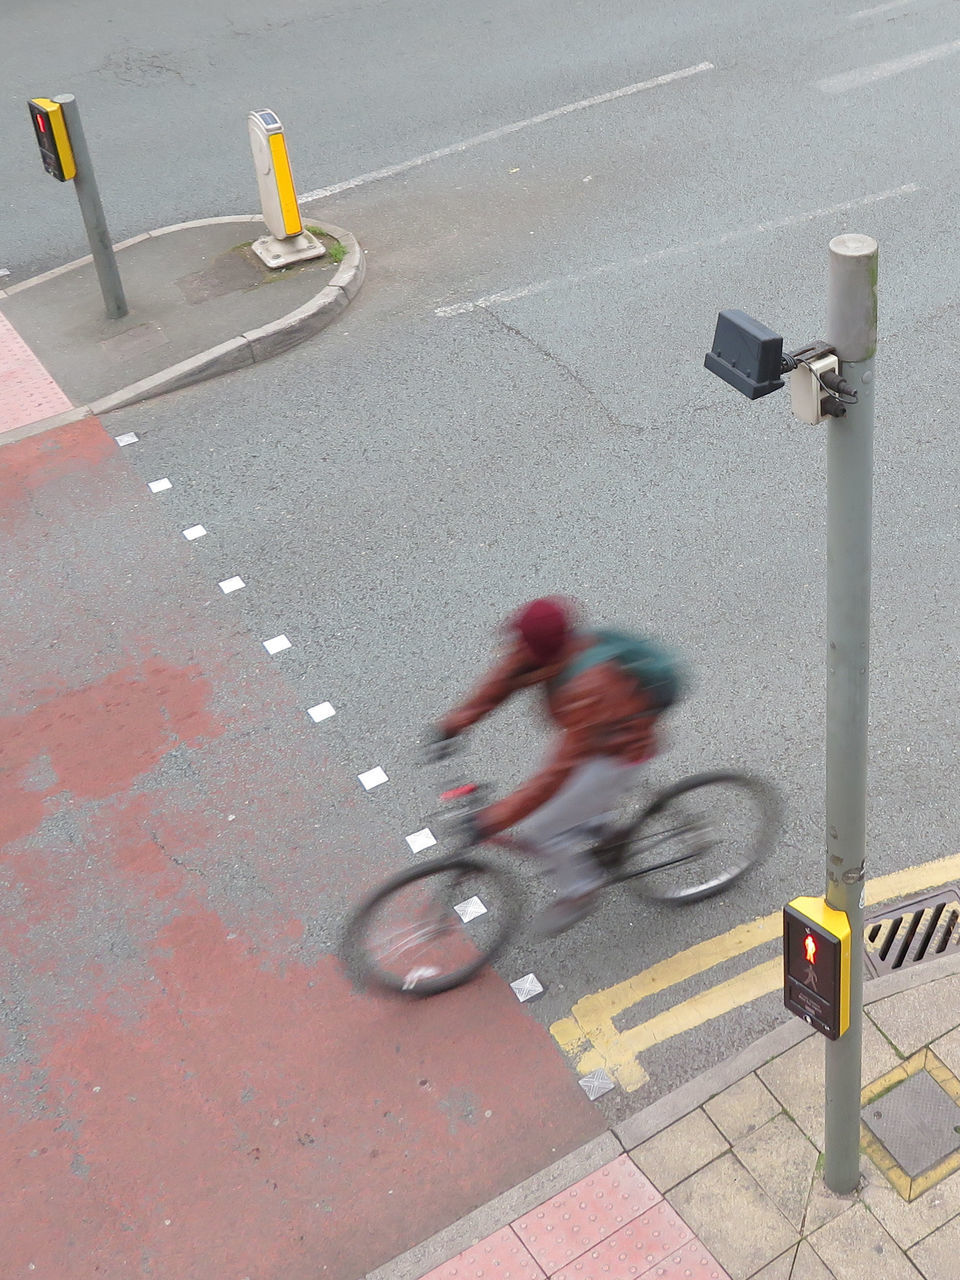 BLURRED MOTION OF BICYCLE ON ROAD